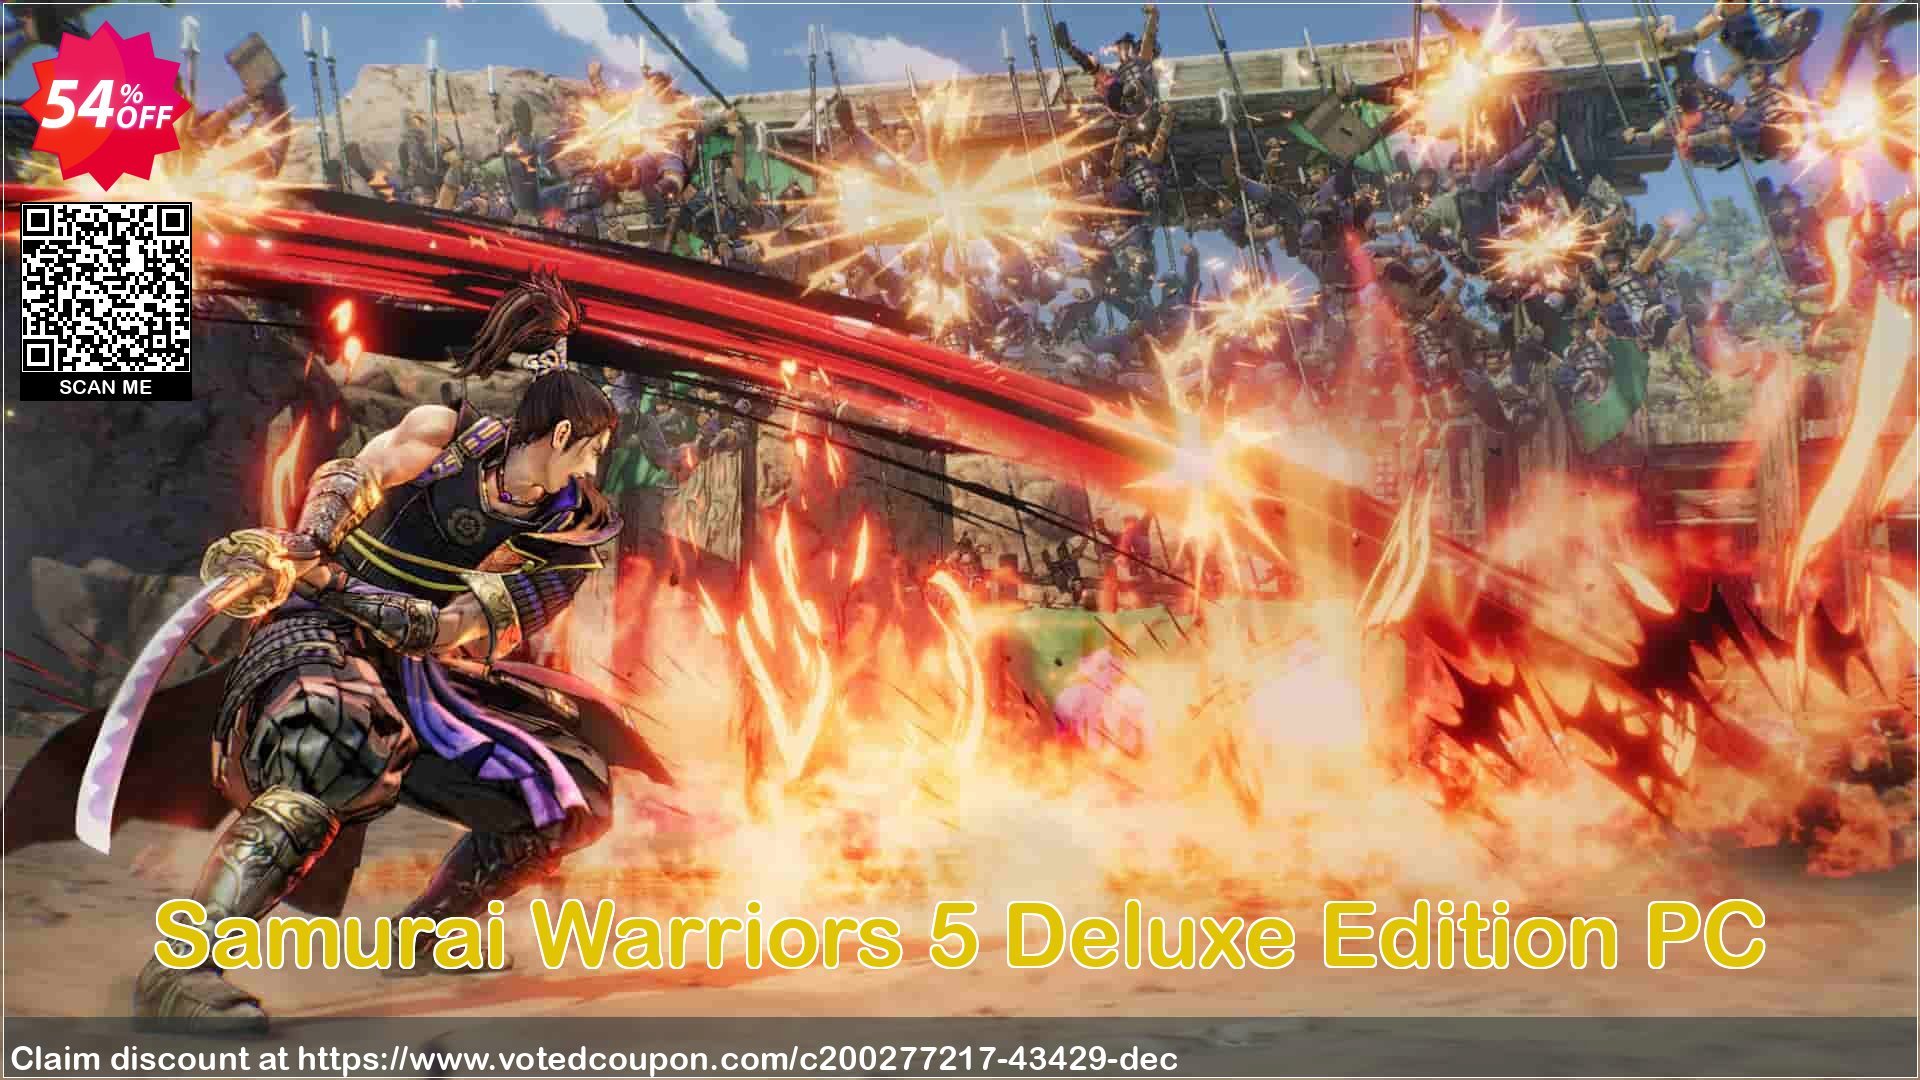 Samurai Warriors 5 Deluxe Edition PC Coupon Code May 2024, 54% OFF - VotedCoupon